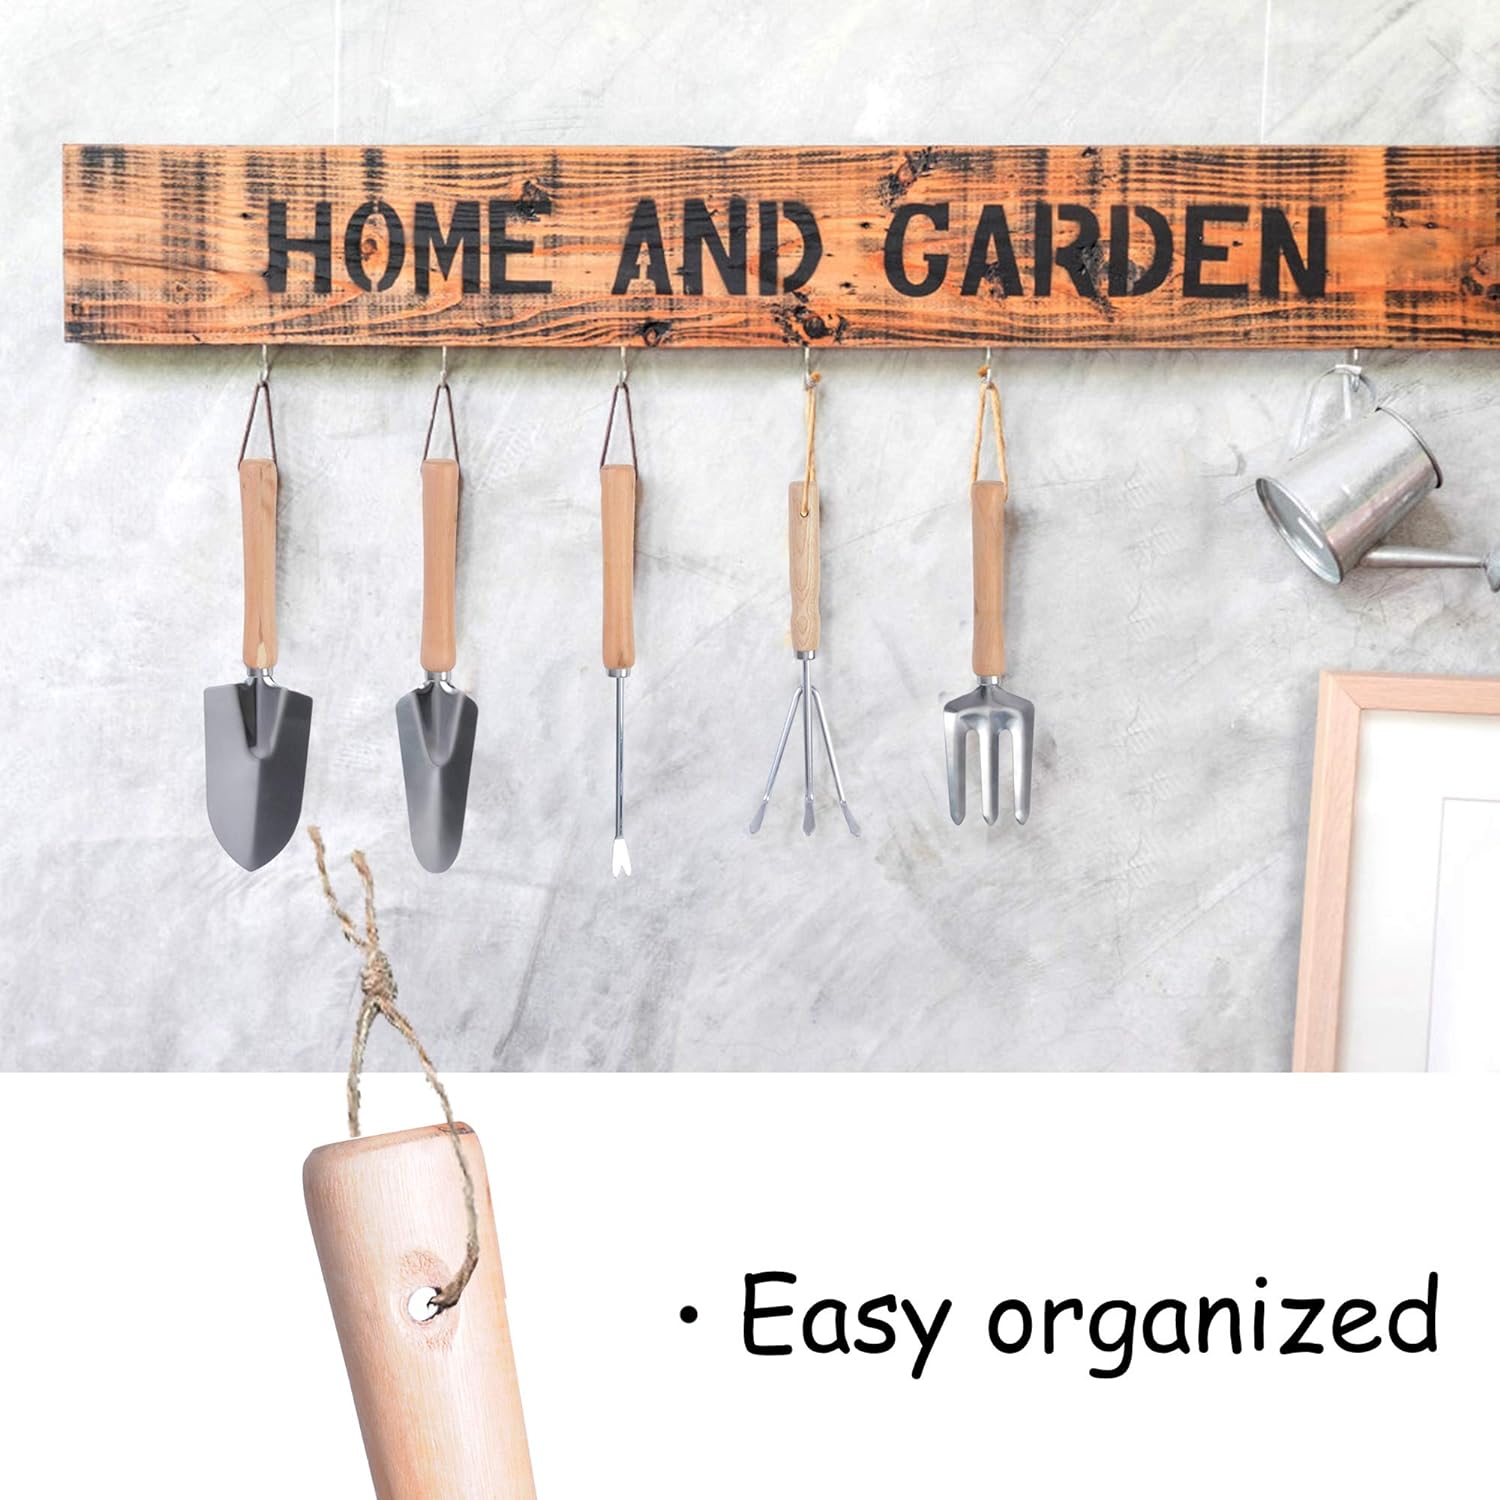 Garden Tool Set 9 Piece Gardening Tools with Ergonomic Wooden Handle Sturdy Stool with Detachable Tool Kit - Luckyermore